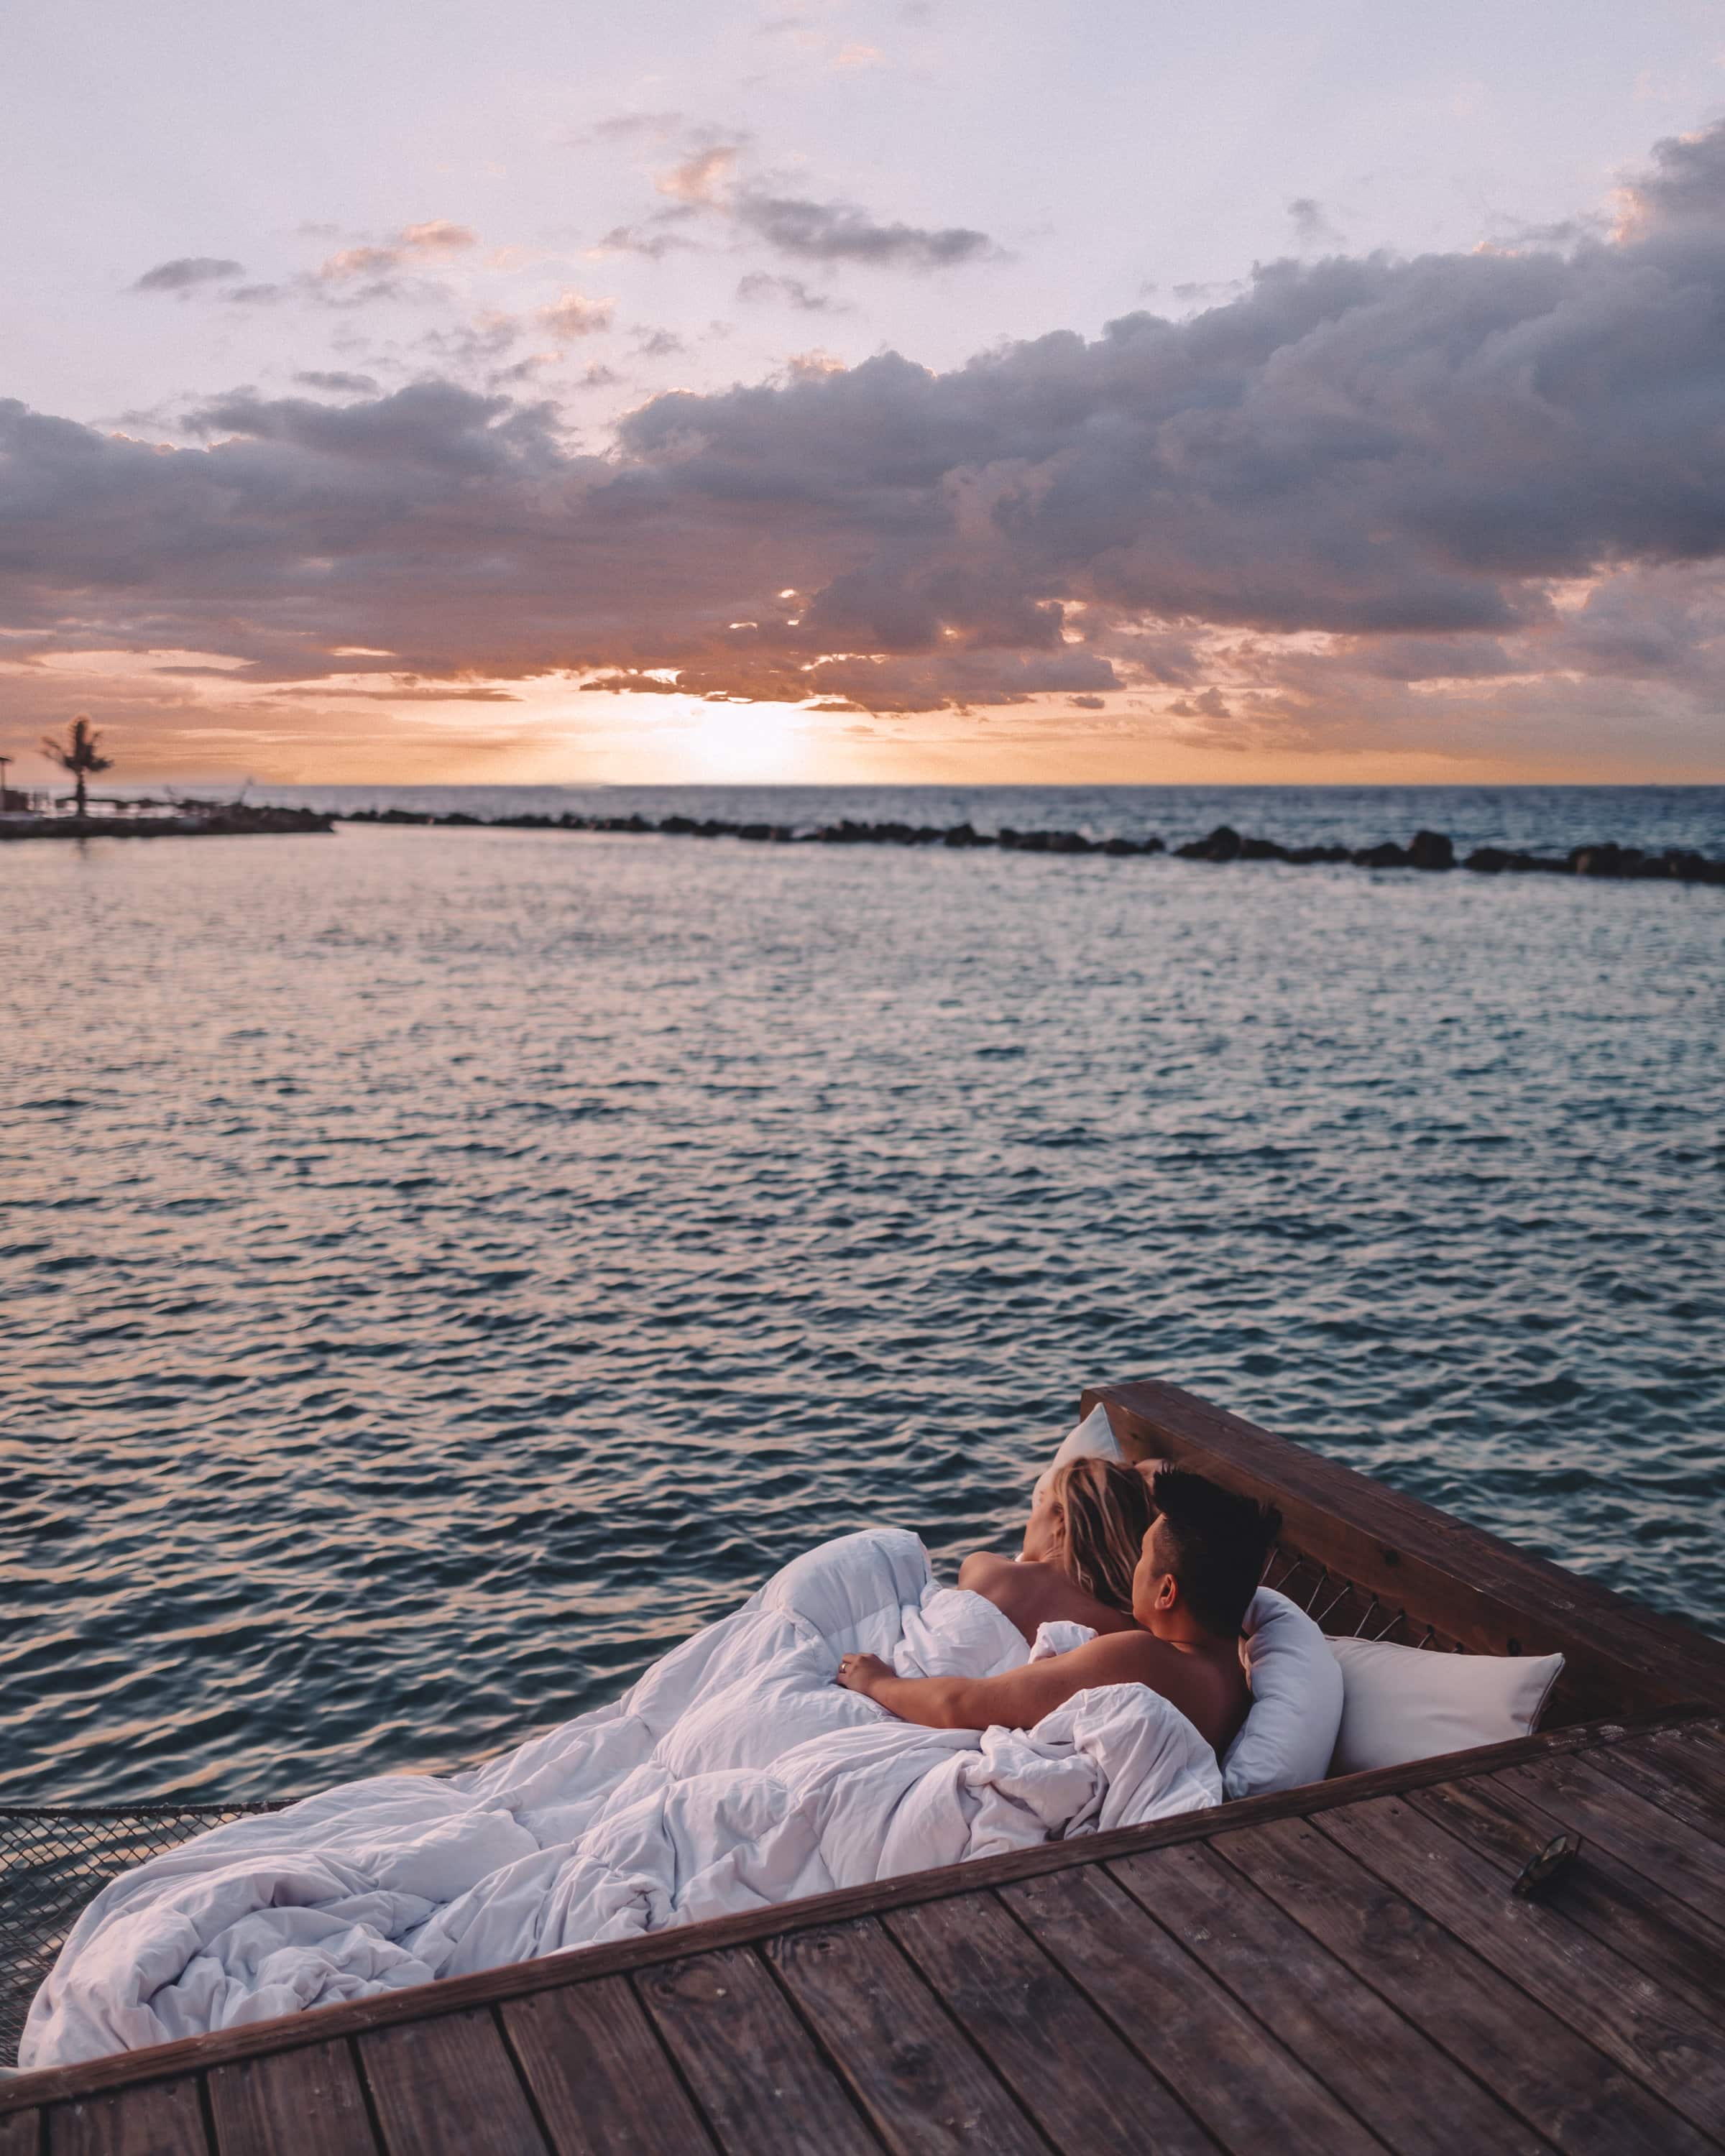 Head To Lover S Island In Aruba For The Ultimate Romantic Getaway